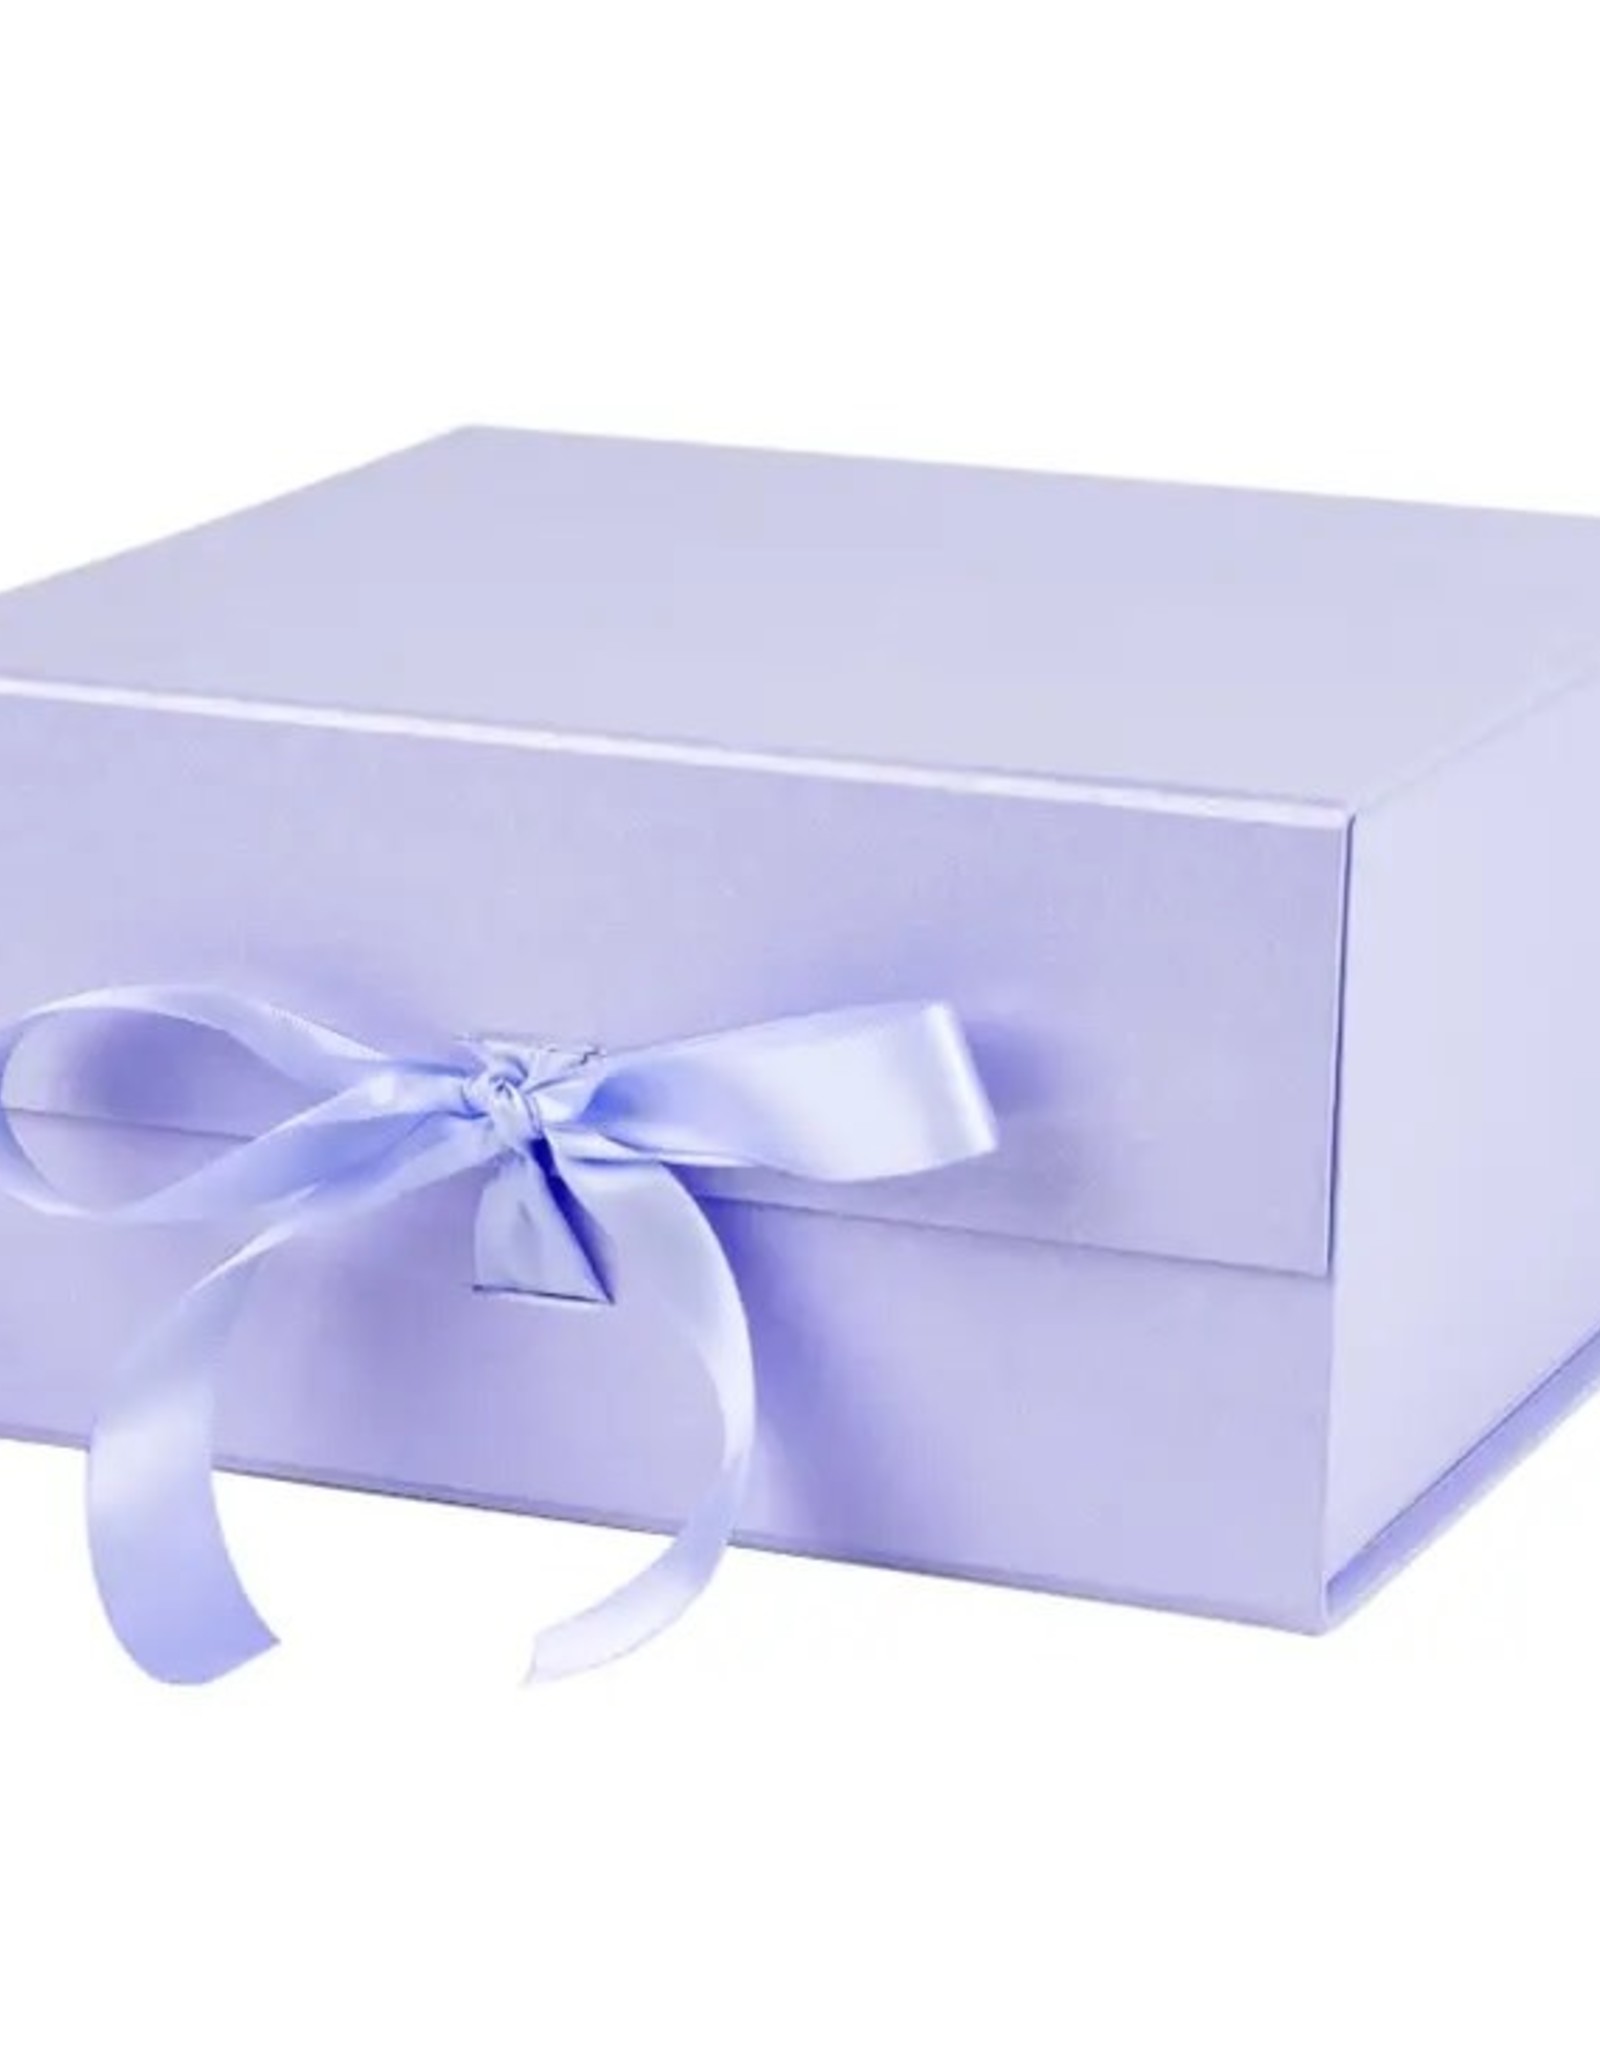 LA Ribbons & Crafts INC LA Ribbons & Crafts INC,  8"x8"x4" Collapsible Magnetic Gift Box with a Satin Ribbon